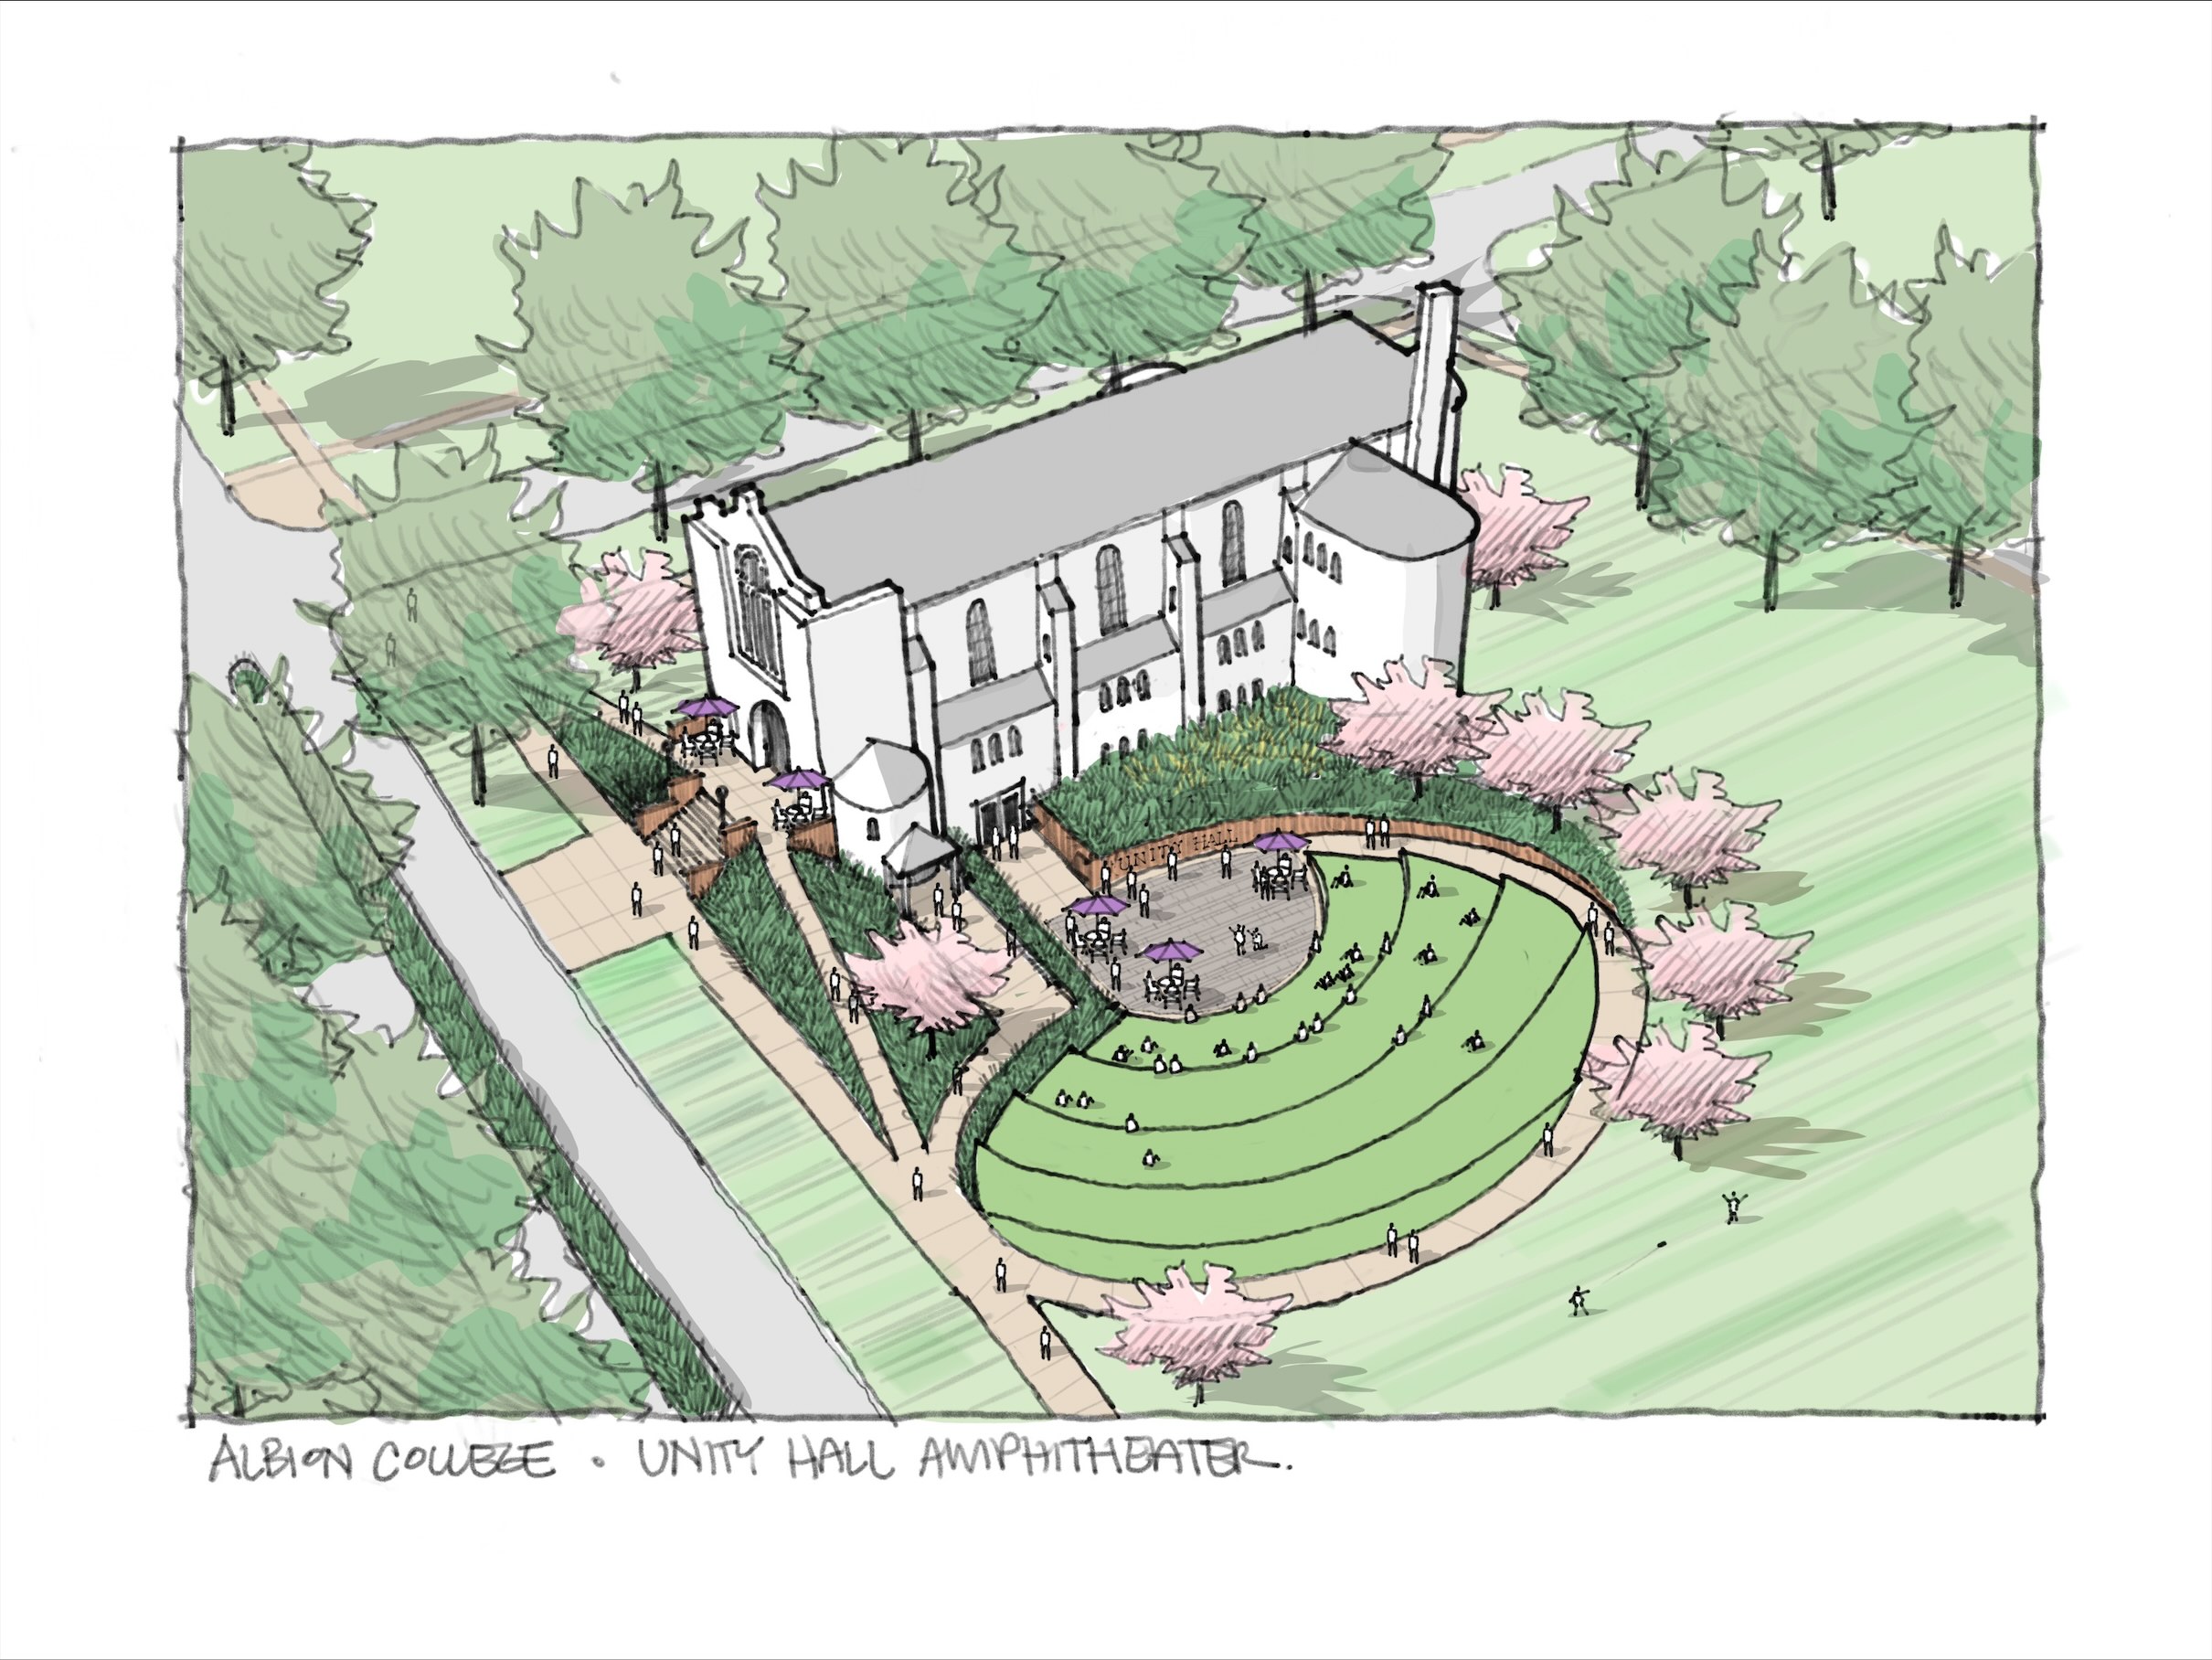 A concept sketch of Alumni Unity Hall showing the outdoor amphitheater space.